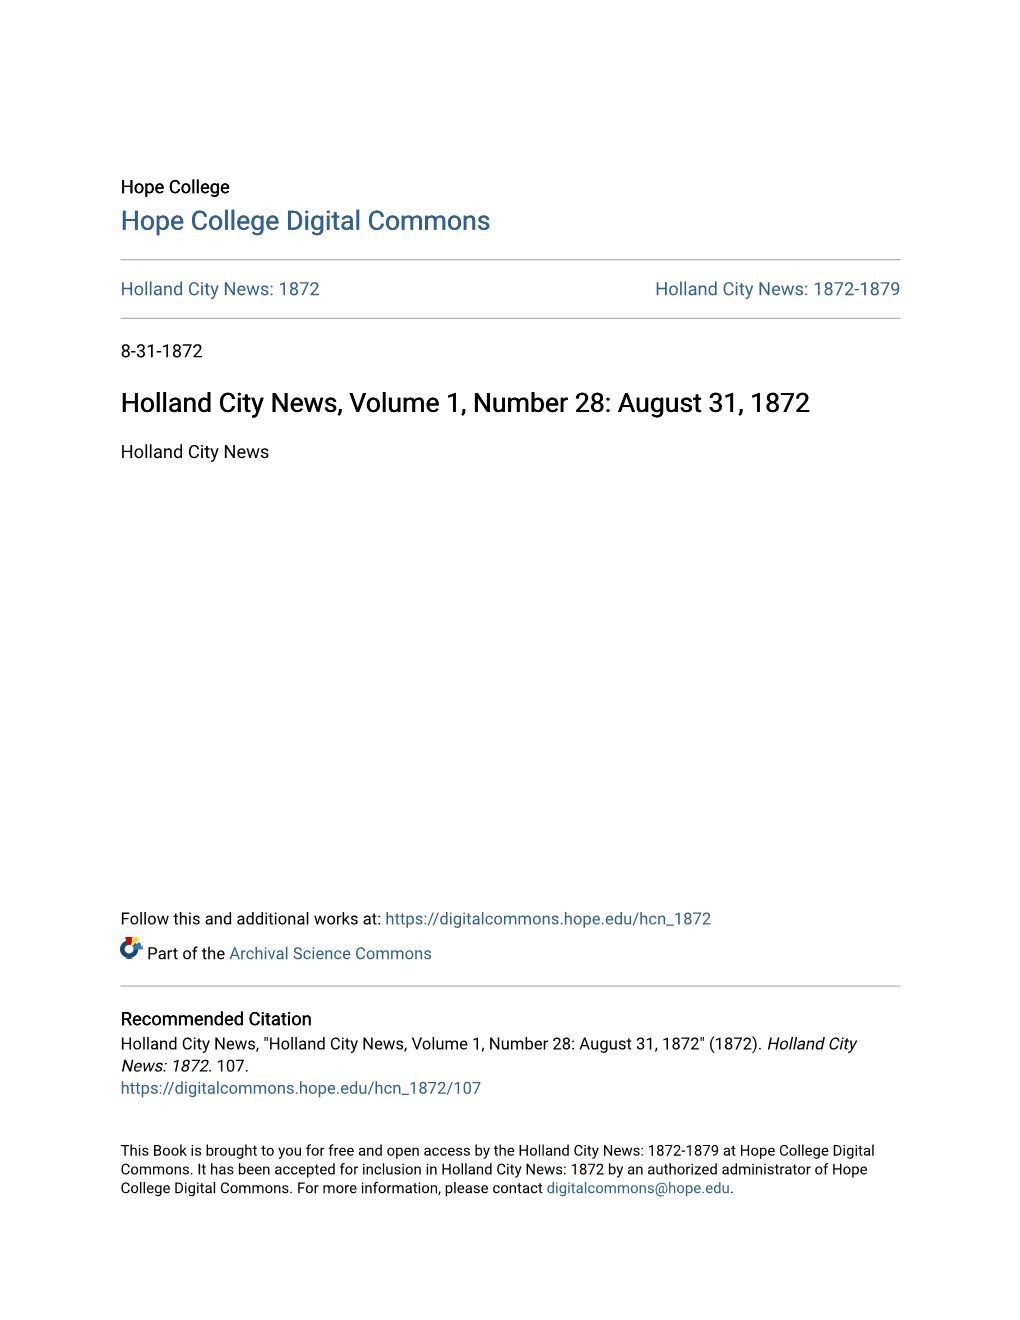 Holland City News, Volume 1, Number 28: August 31, 1872